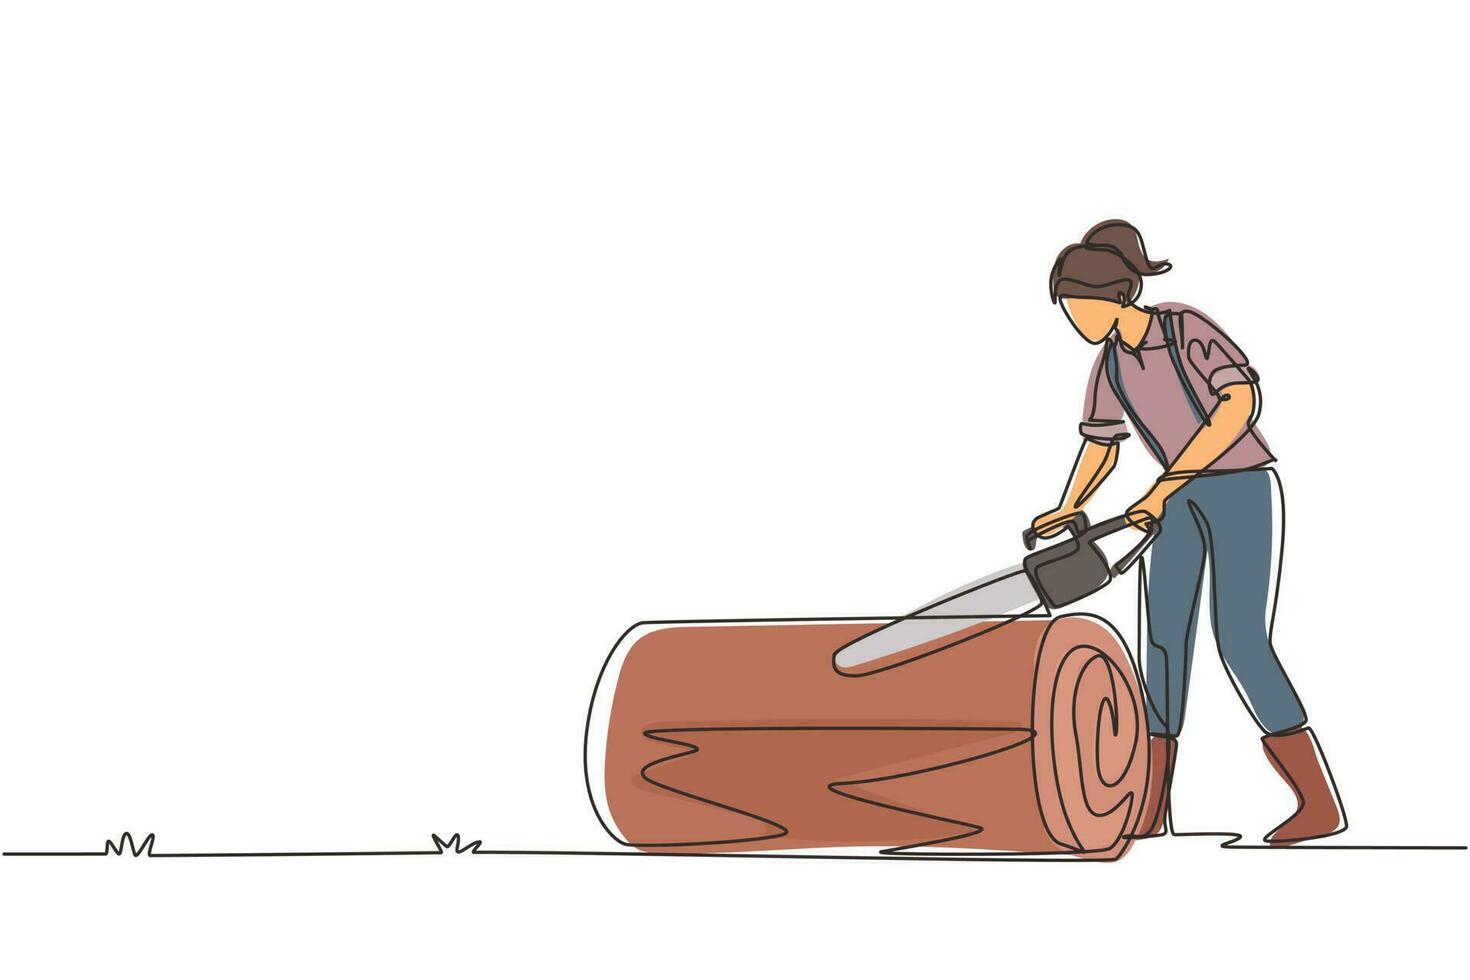 Single continuous line drawing wood industry worker with chainsaw working. Woman logger sawing log in forest. Girl lumberjack cut timberwood, woodcutter occupation. One line design vector illustration